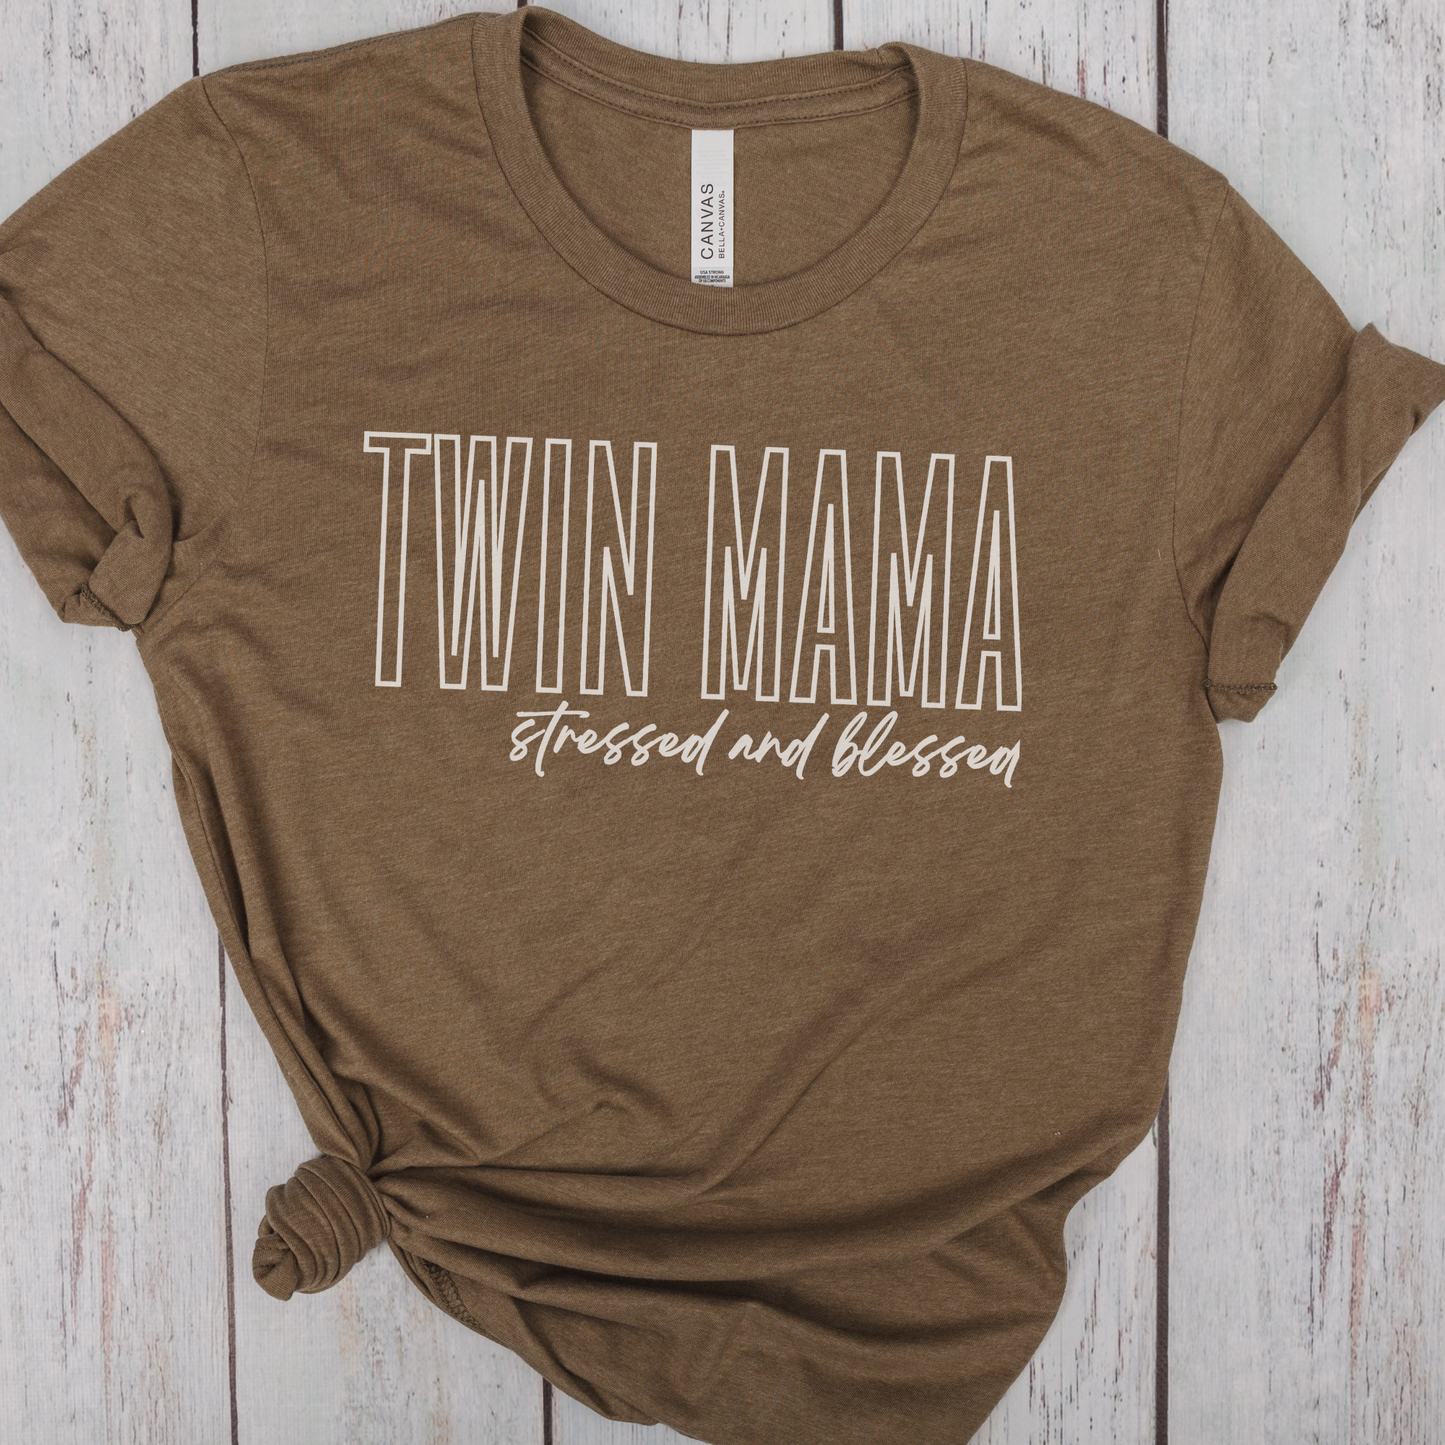 Twin Mama Stressed and Blessed White Block Hollow Letters Paint Style Script Unisex Jersey Short Sleeve Tee Small-3XL Mother of Multiples